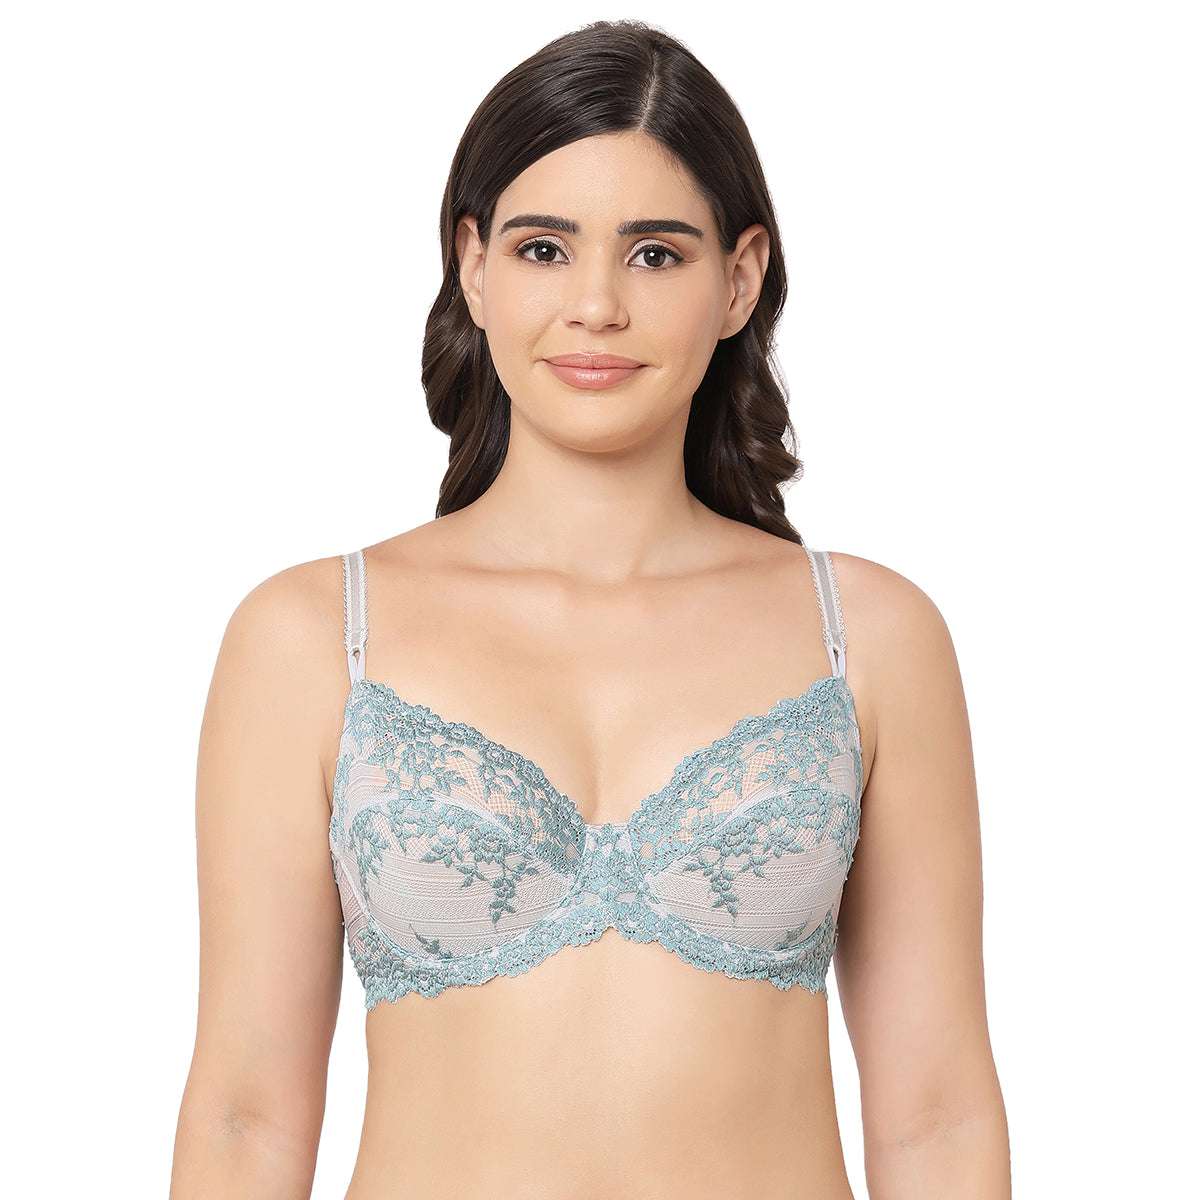 Matching Bras and Panties Set with Floral Lace Design SOLD SEPARATELY  (6-Pack)